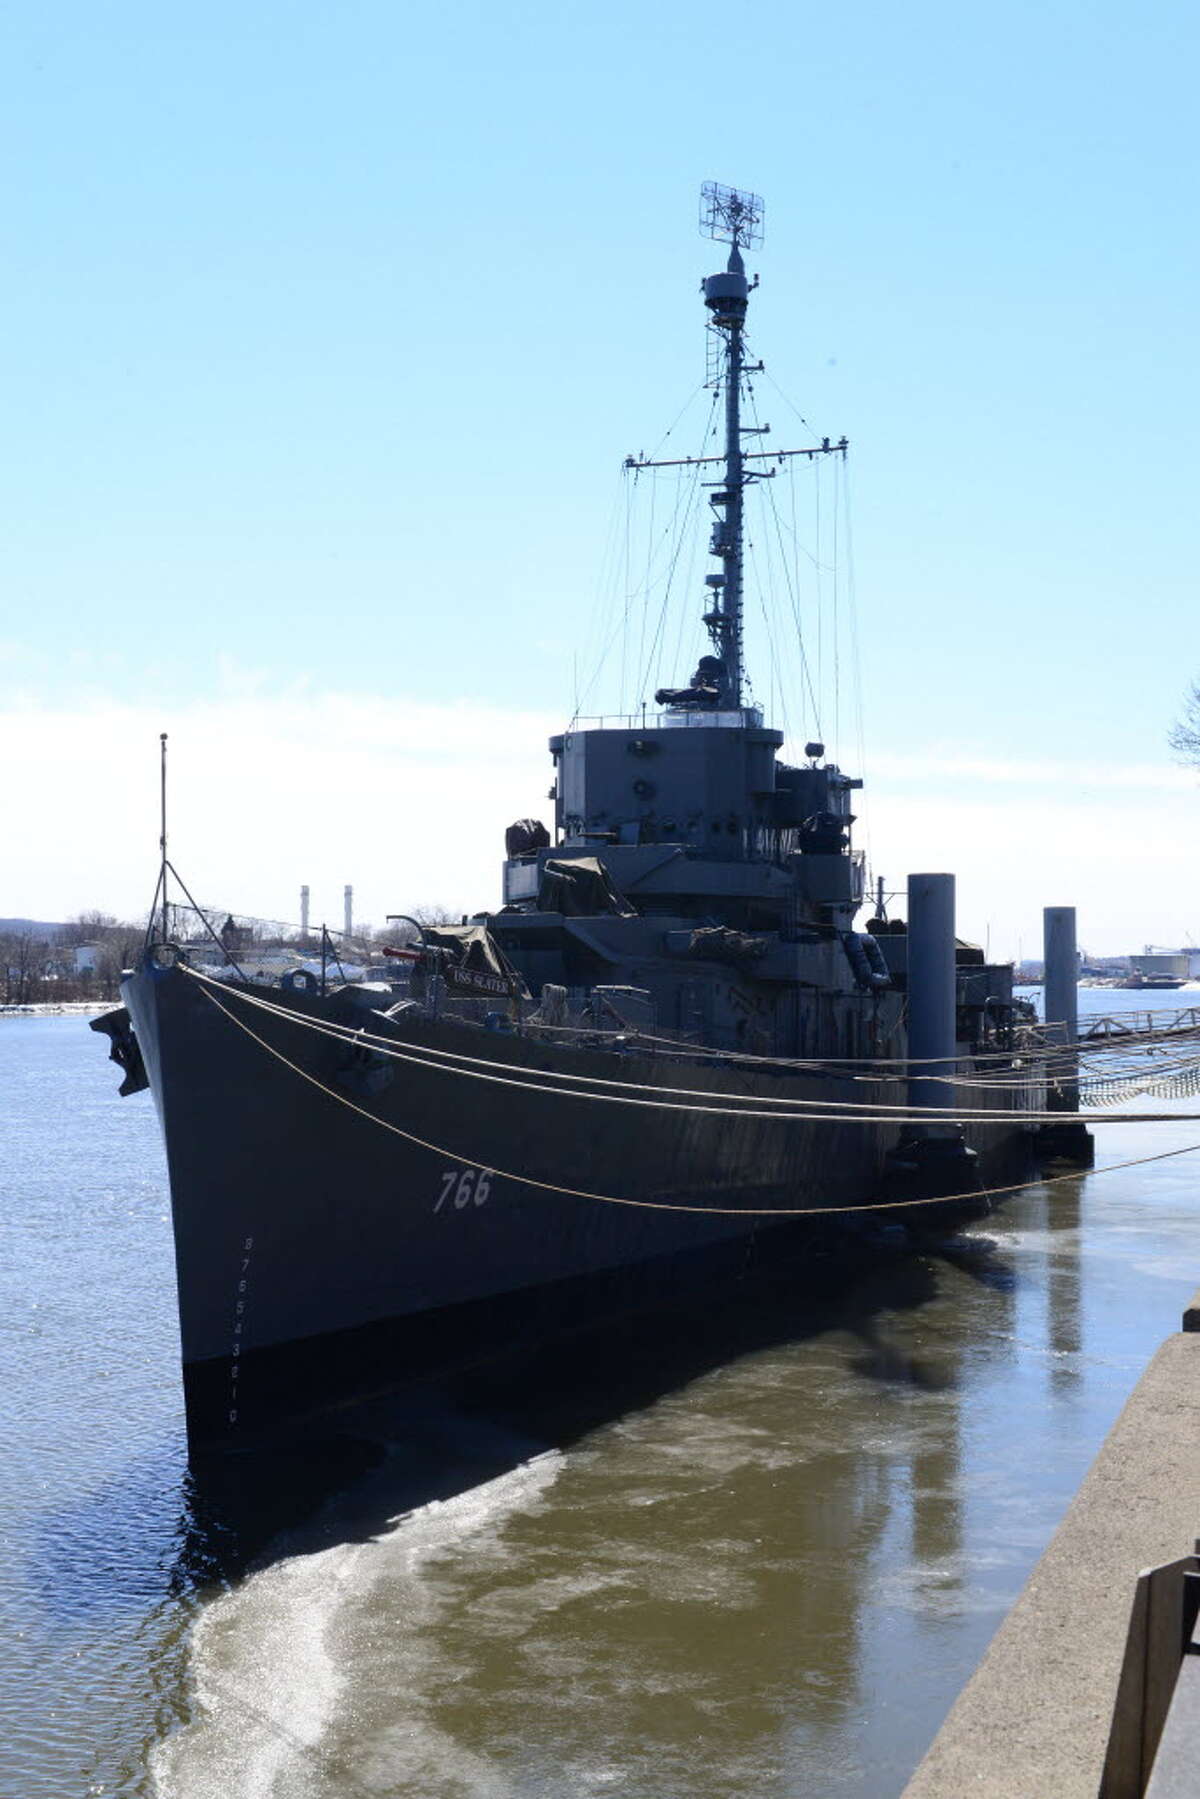 View of the USS Slater, March 17, 2014, at the ship's mooring dock on Broadway in Albany. The Slater was being prepared to travel to Staten Island to be put in drydock to undergo maintenance and repairs. (Will Waldron/Times Union archive)